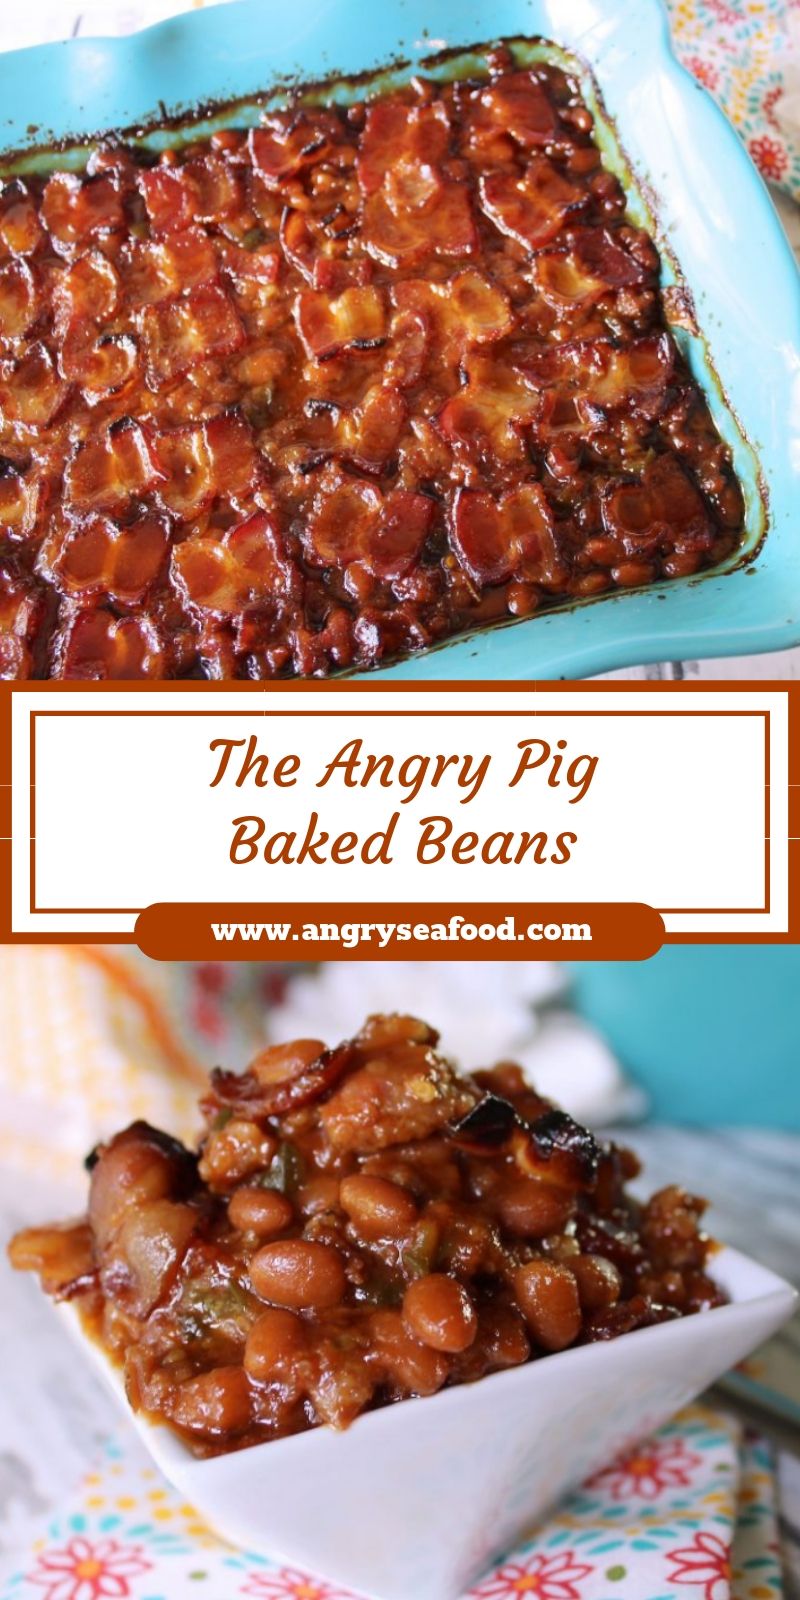 The Angry Pig Baked Beans